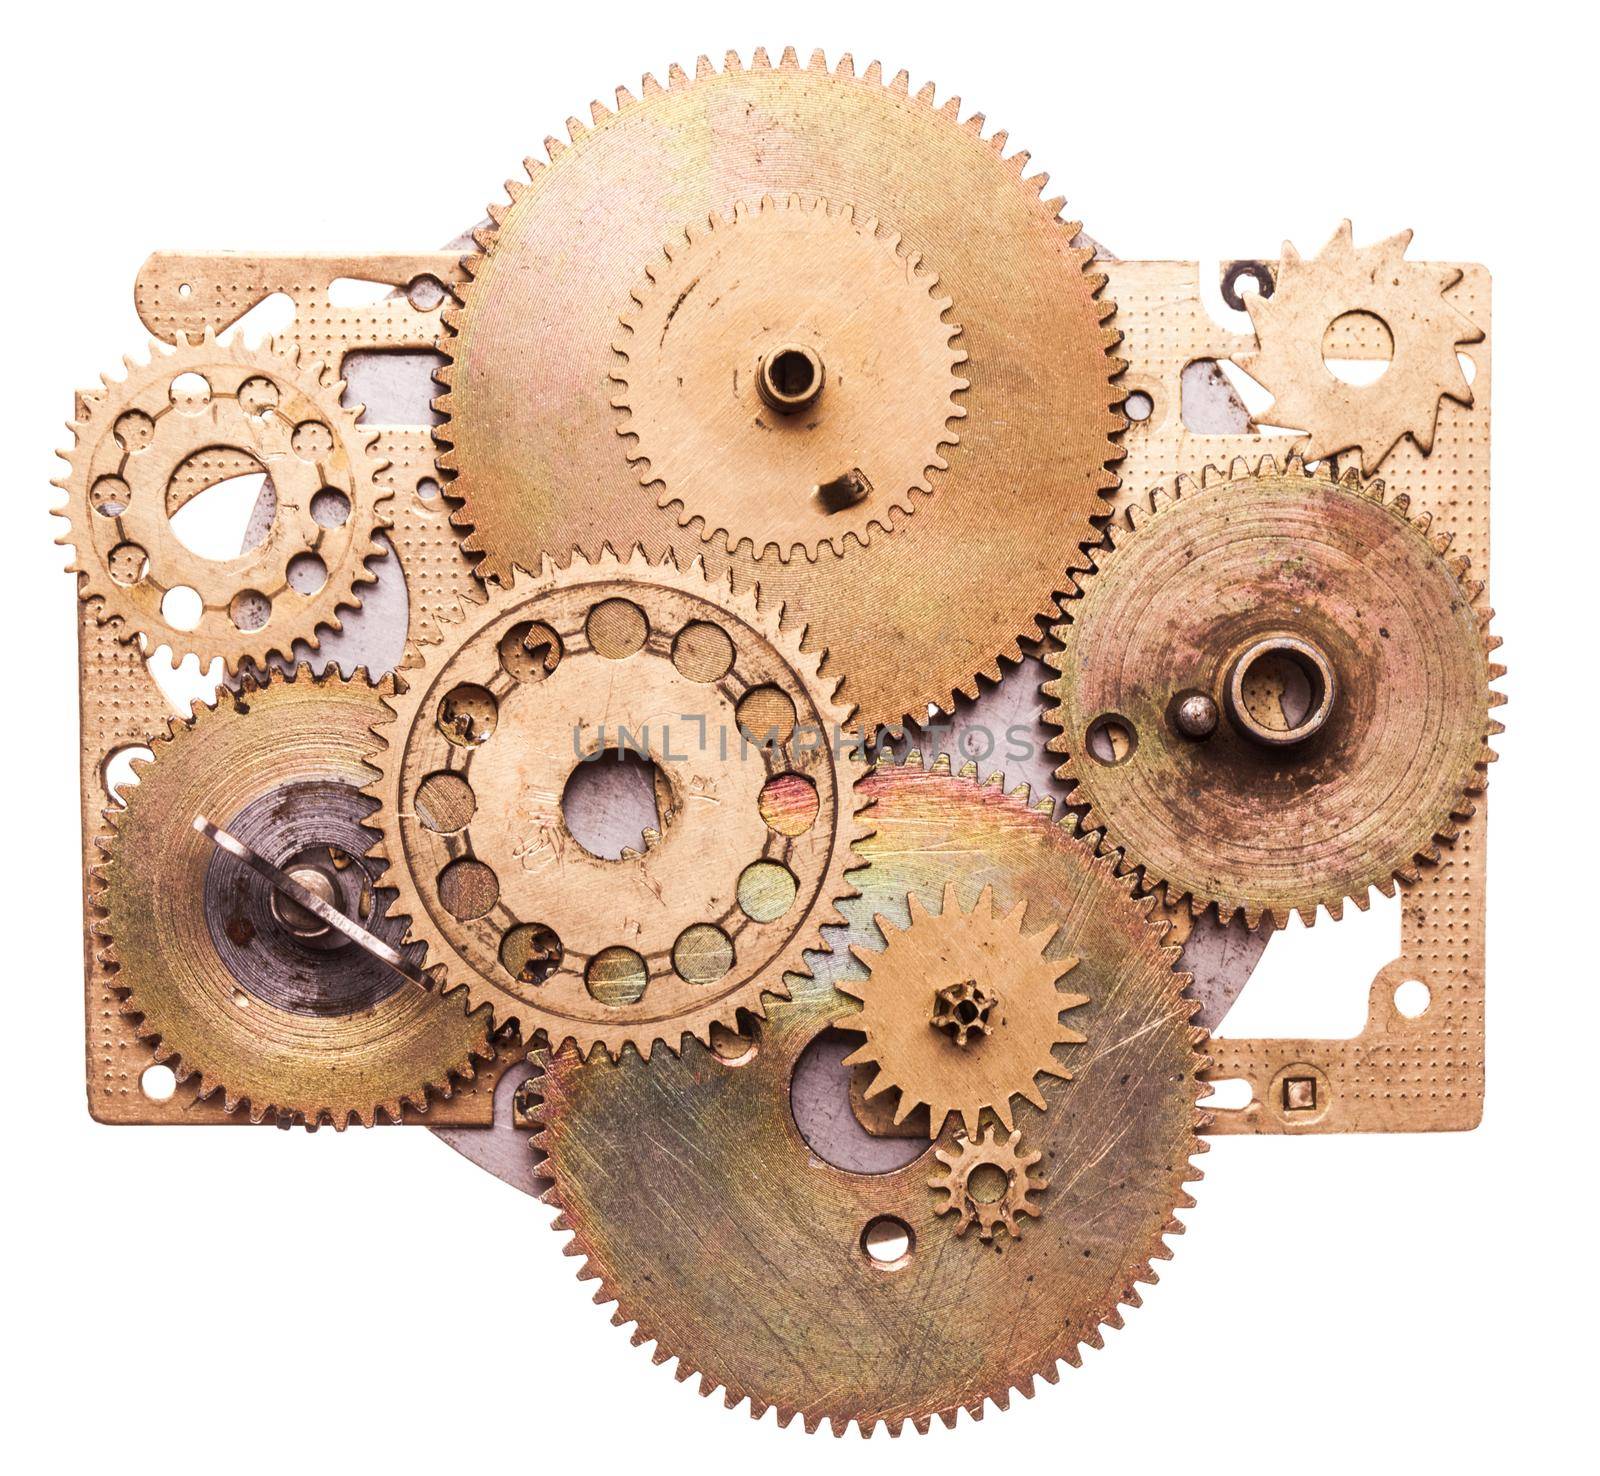 Steampunk details isolated on white. Mechanical clocks details, gears as a fantasy device